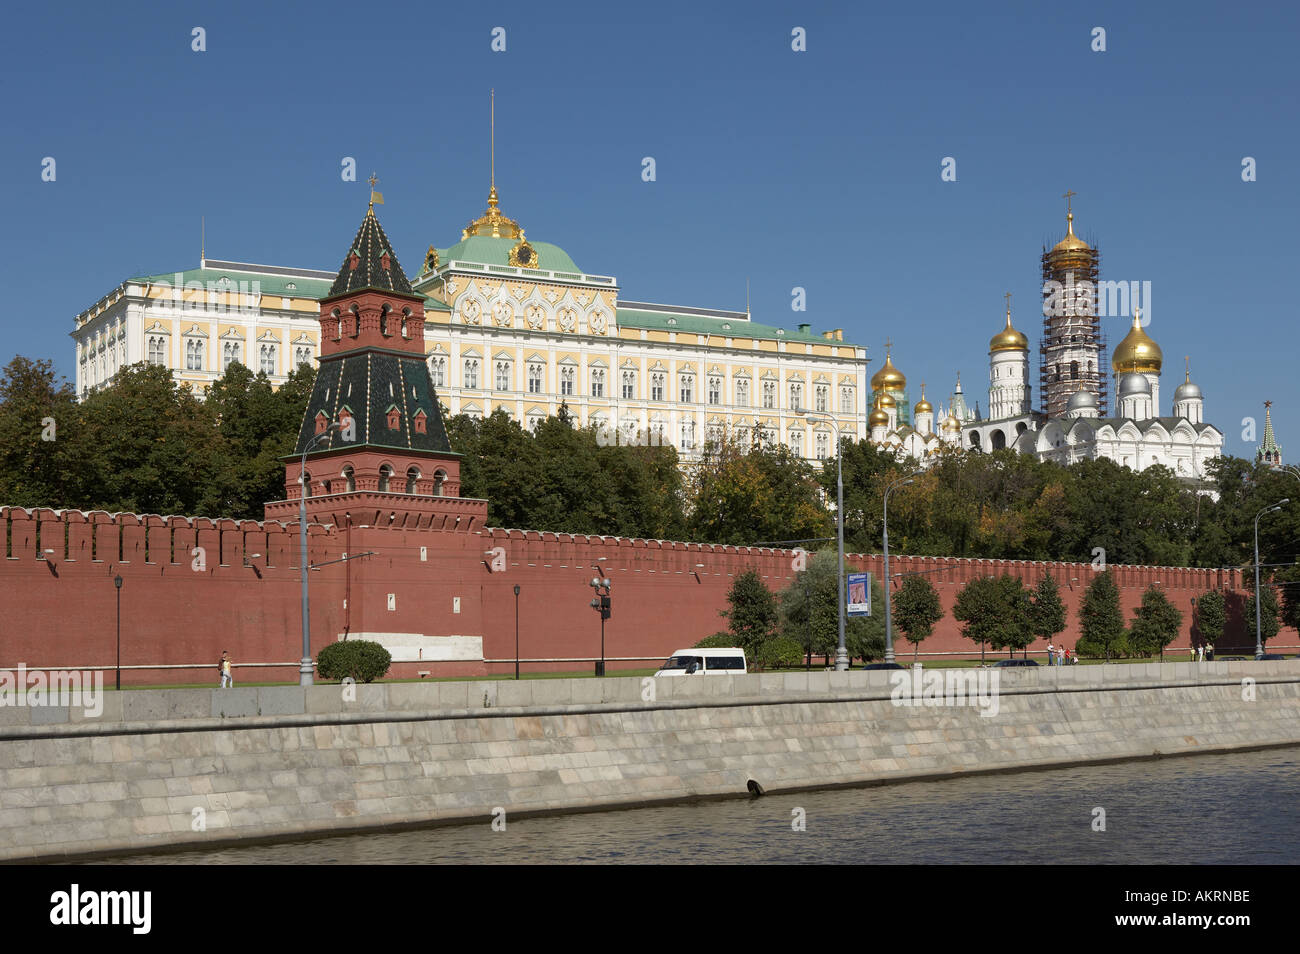 KREMLIN WALL GRAND PALACE ANNUNCIATION CATHEDRAL TOWER EMBANKMENT AND RIVER MOSCOW RUSSIA Stock Photo